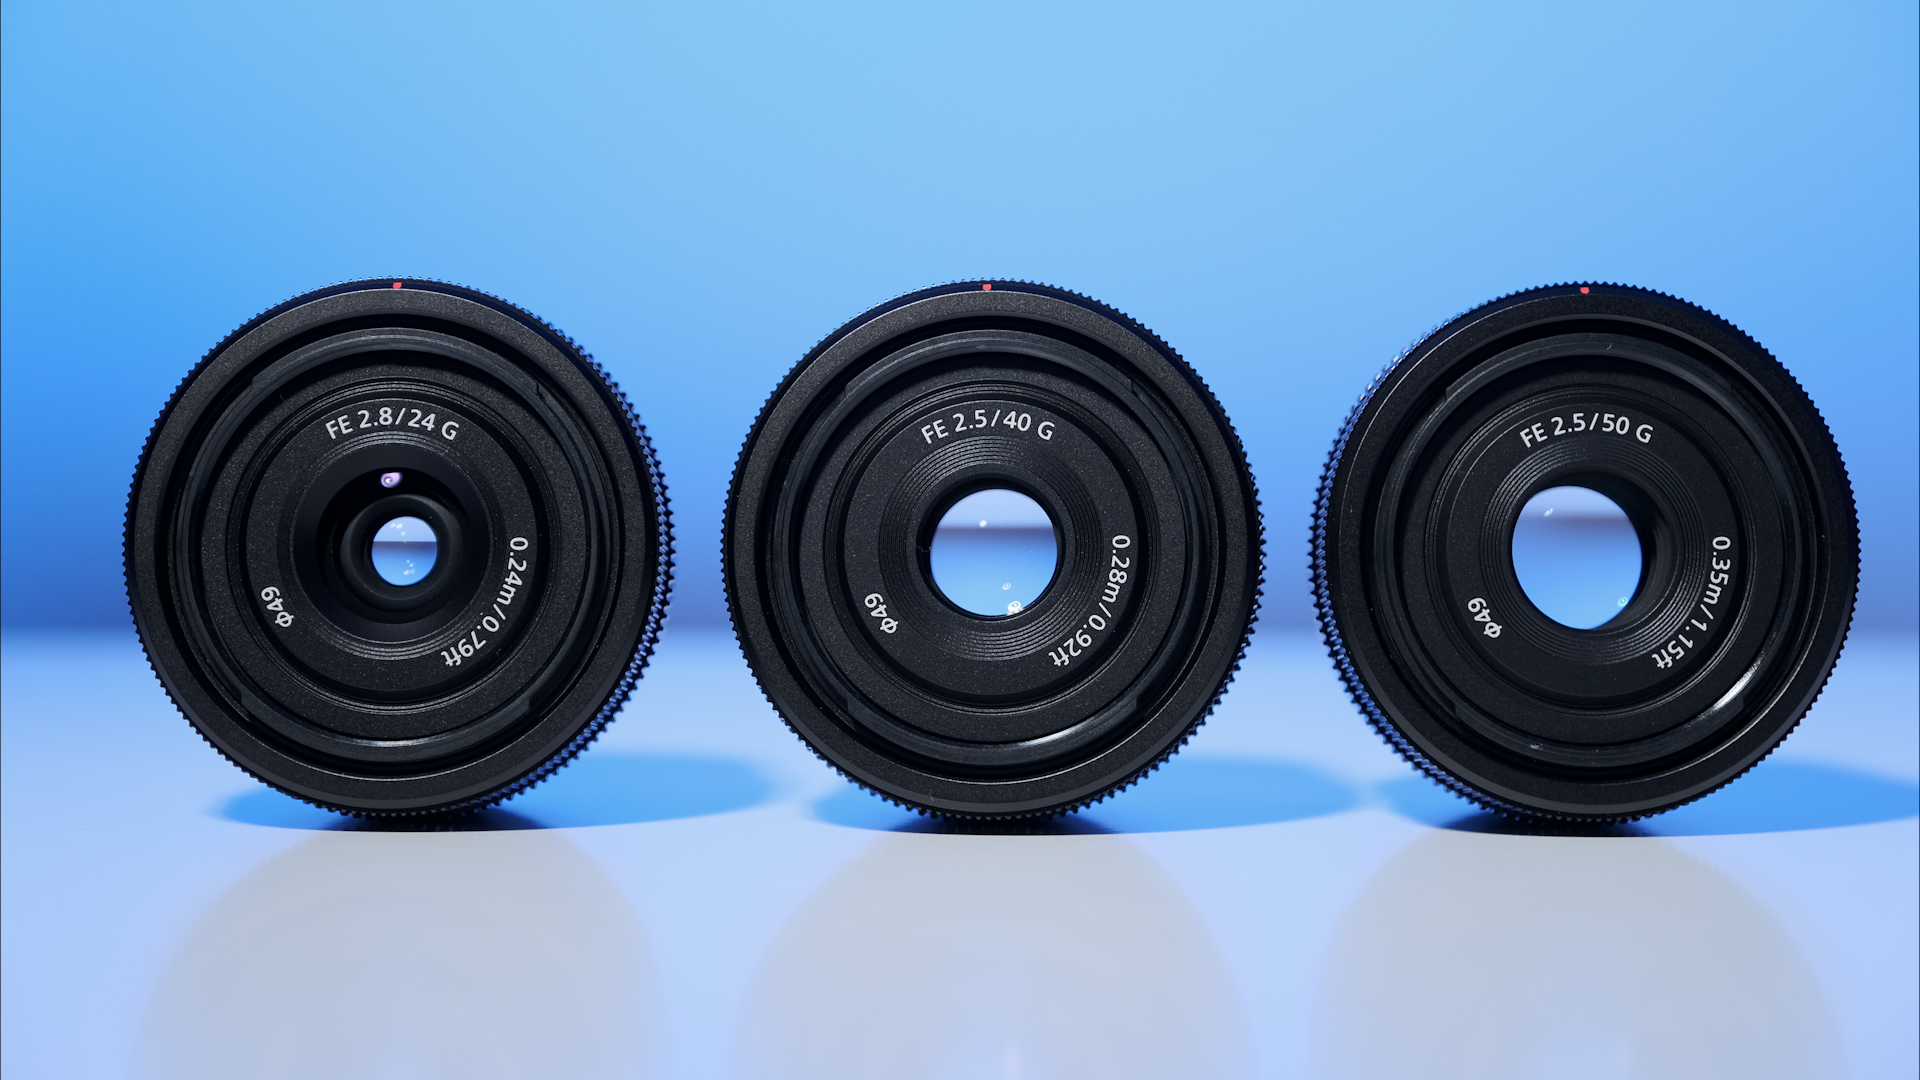 ソニーが24mm F2.8 G、40mm F2.5 G、50mm F2.5 Gレンズを発表 | CineD